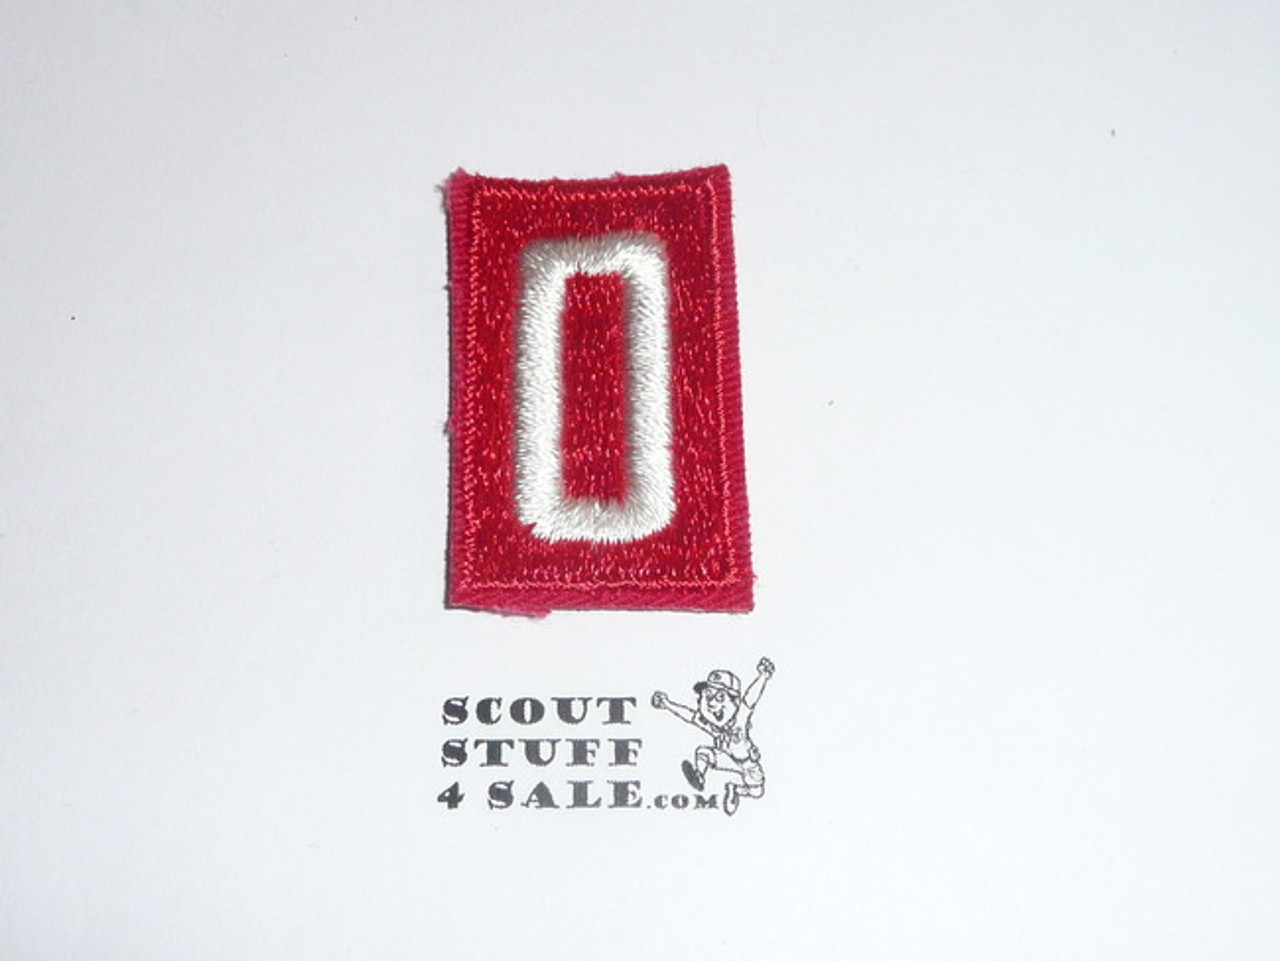 Old Red Troop Numeral "0", Fully Embroidered